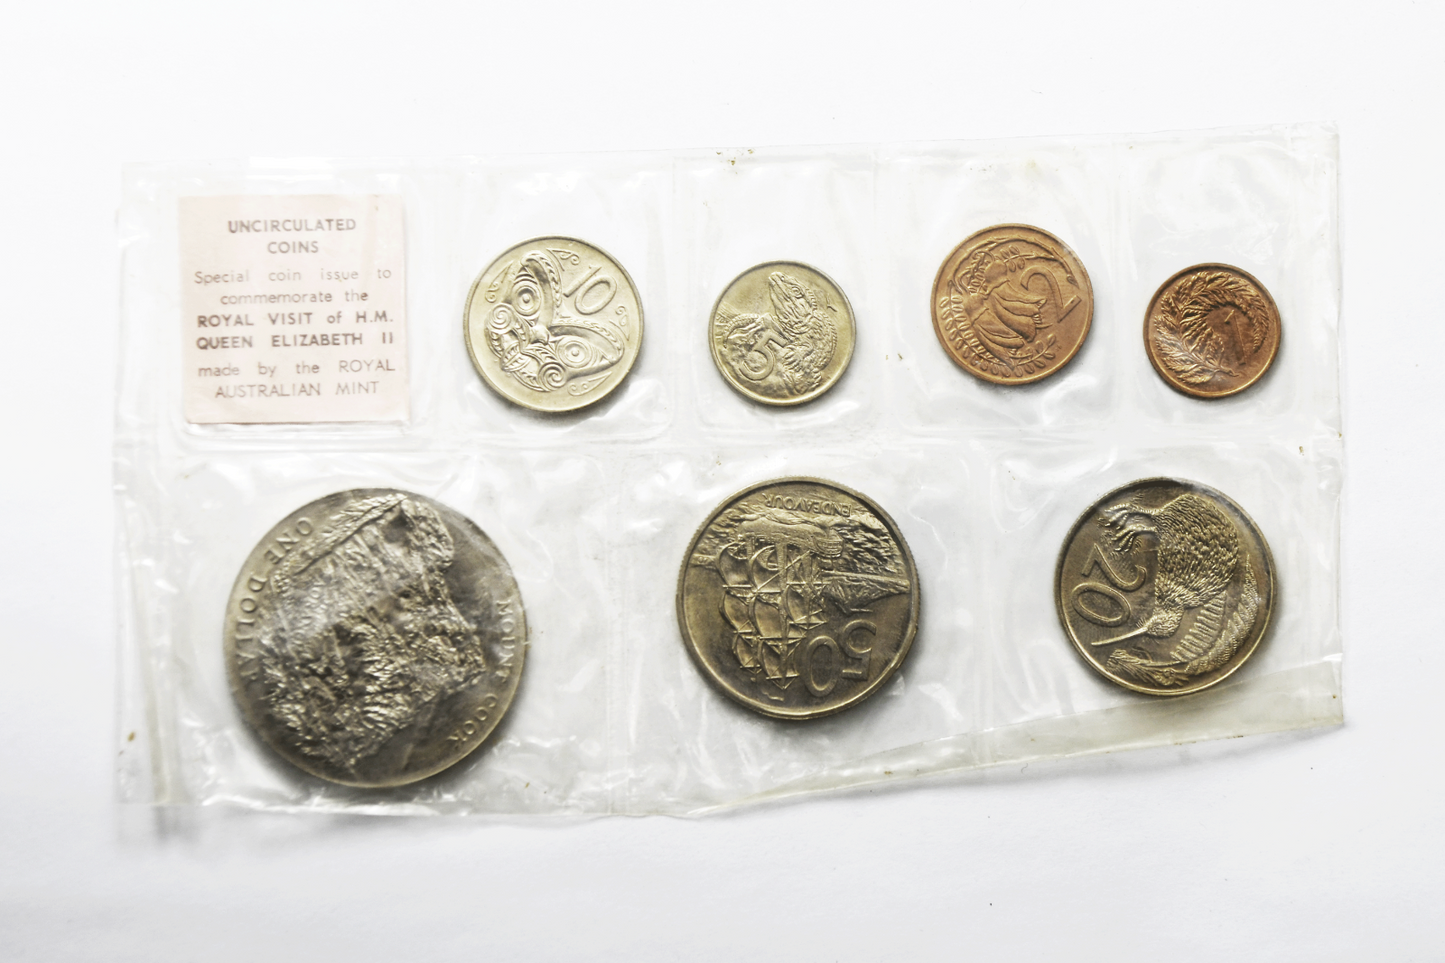 1969 Cook Commemorative New Zealand 7 Uncirculated Coin Set